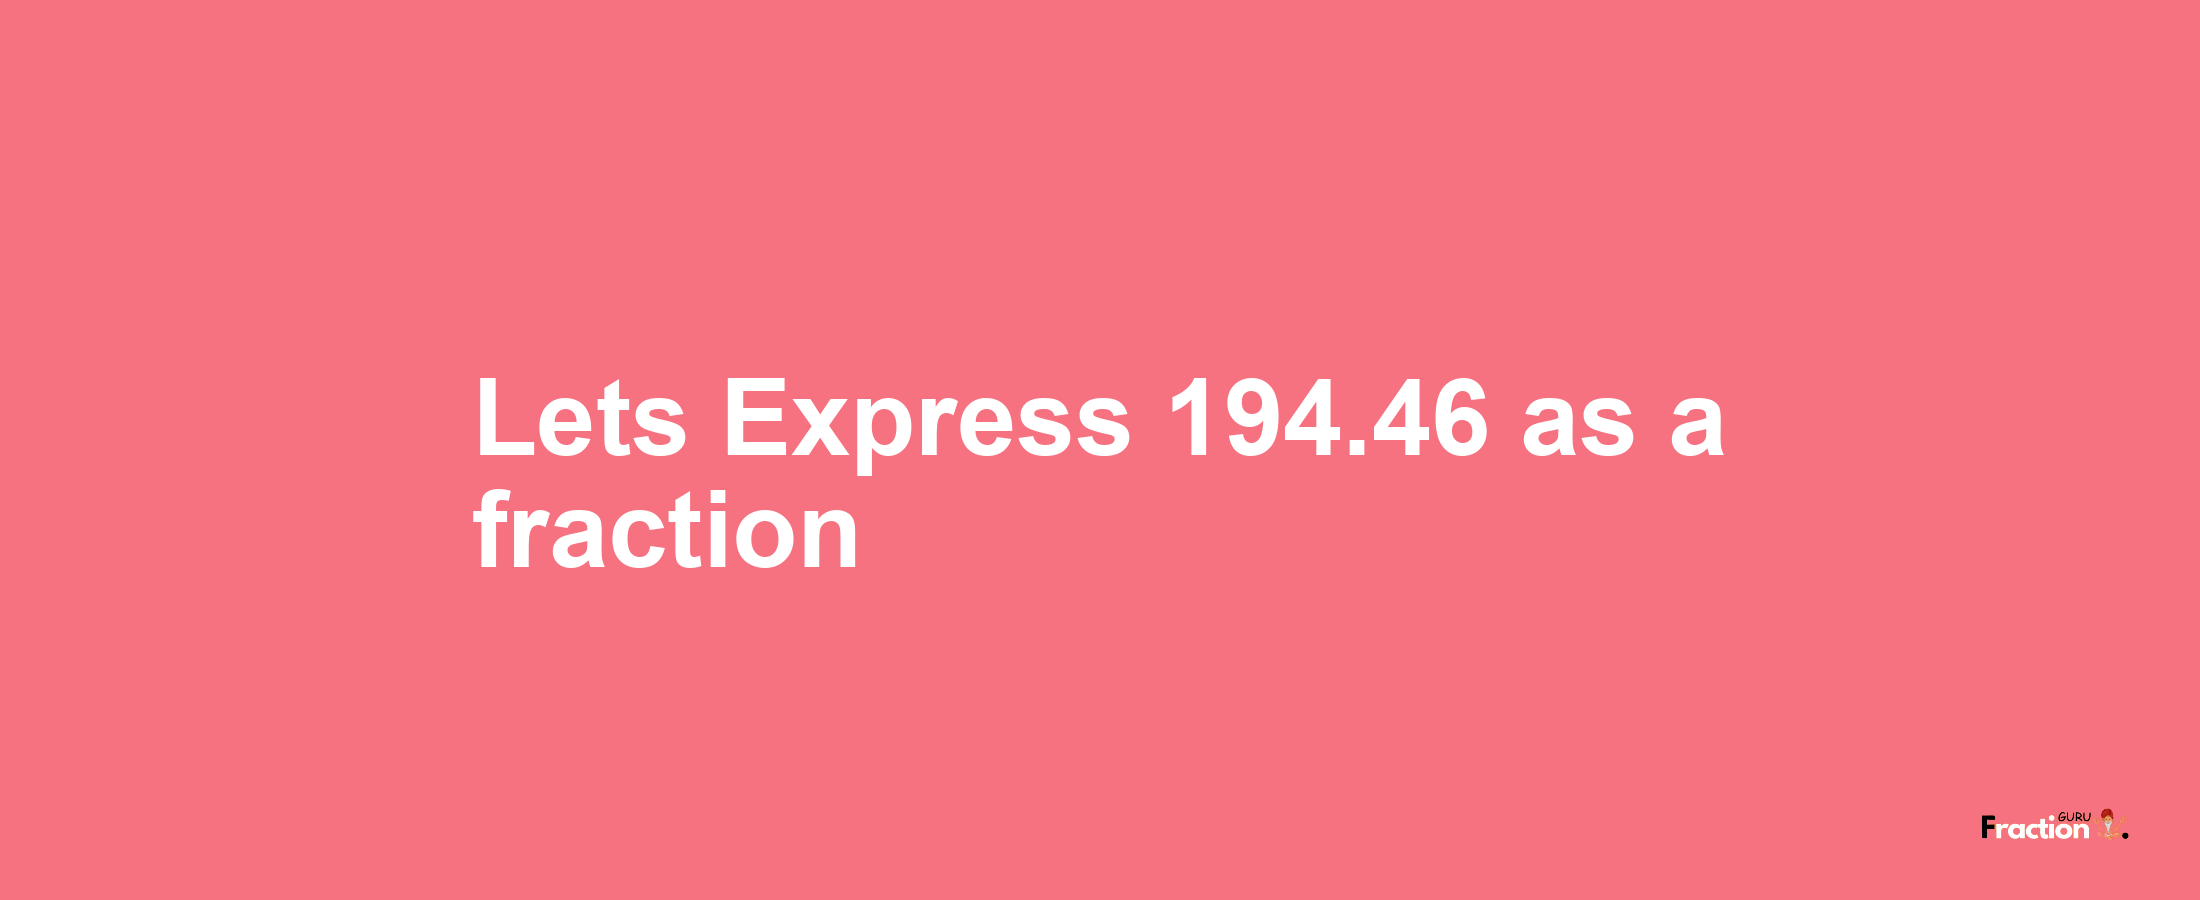 Lets Express 194.46 as afraction